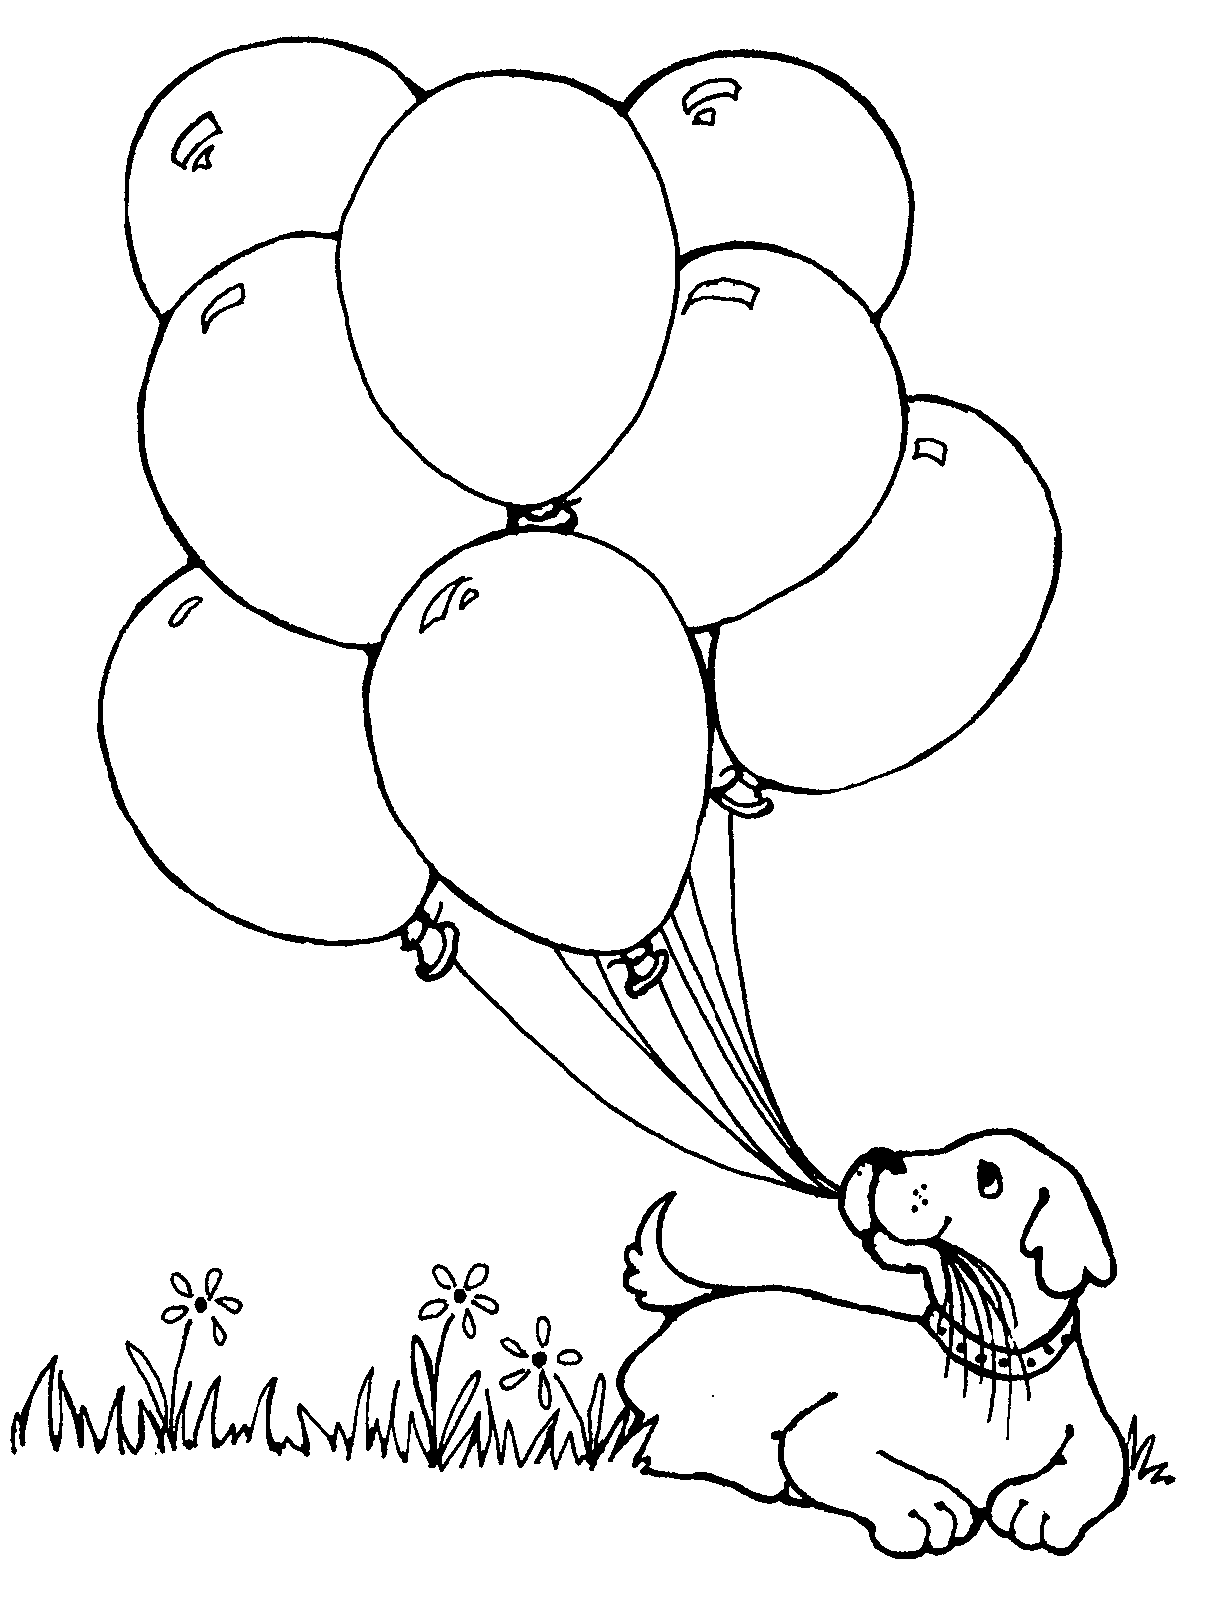 Birthday Balloons Clip Art Black And White - Gallery